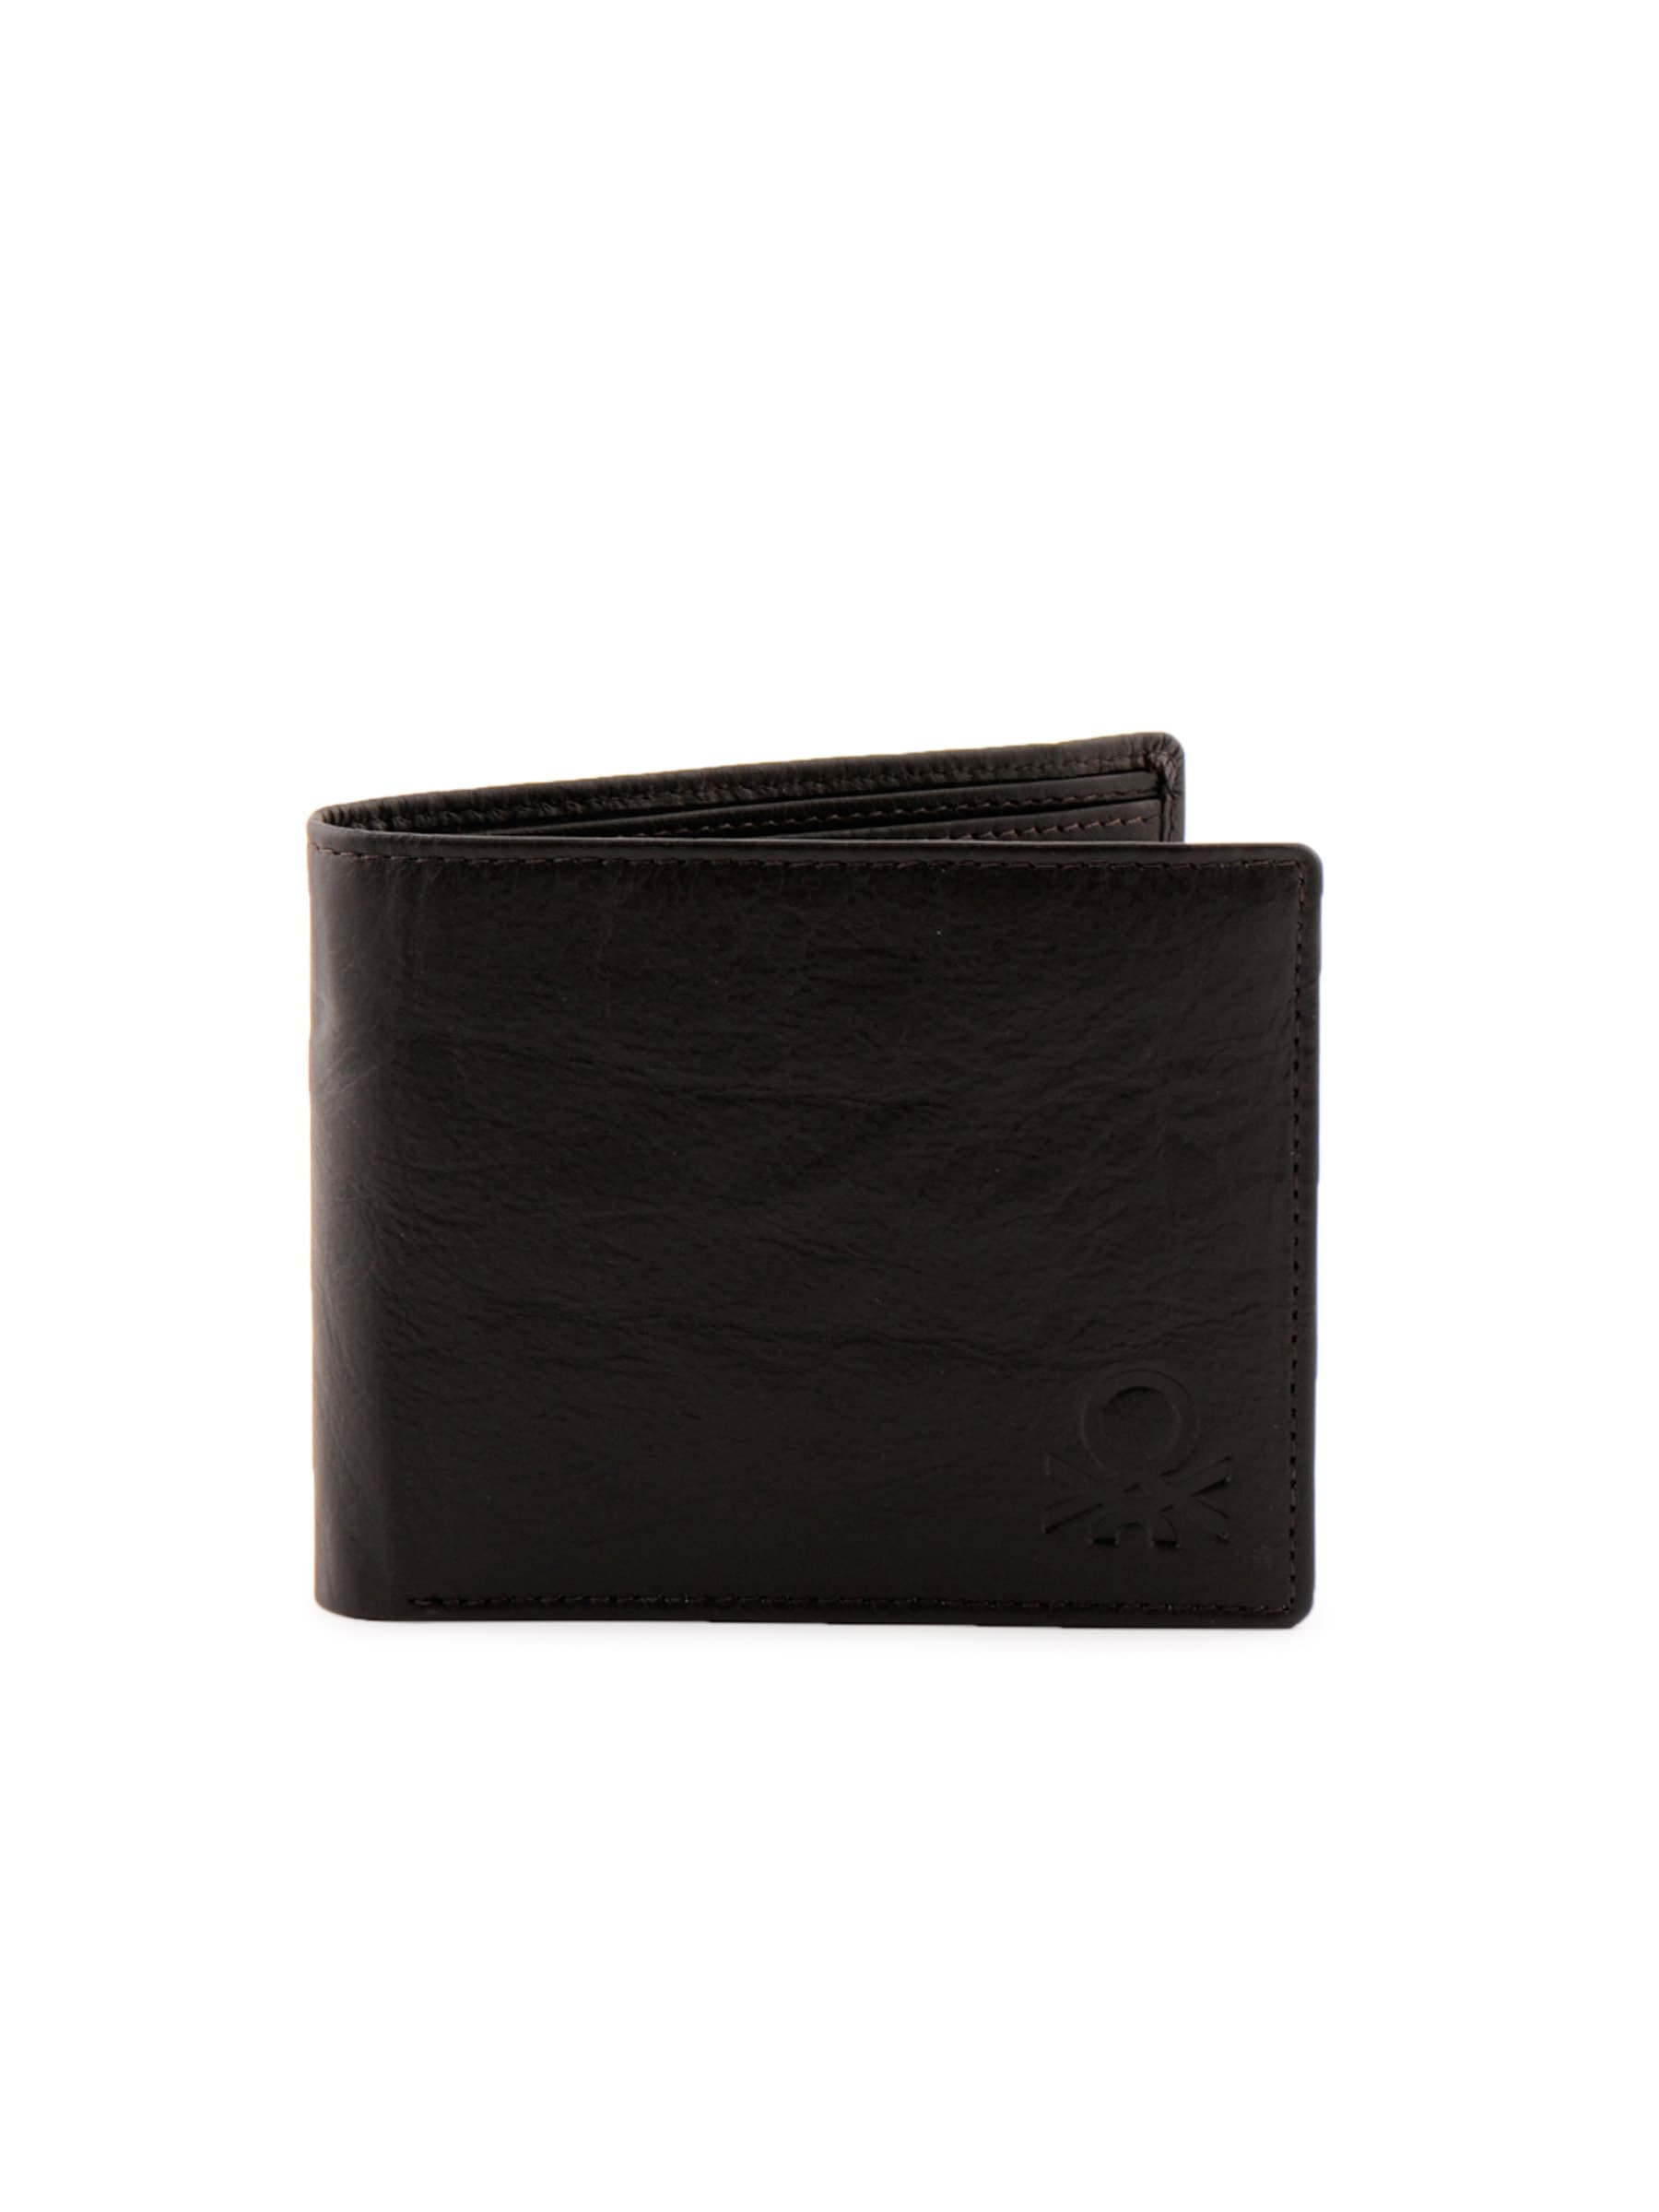 United Colors of Benetton Men Solid Brown Wallets